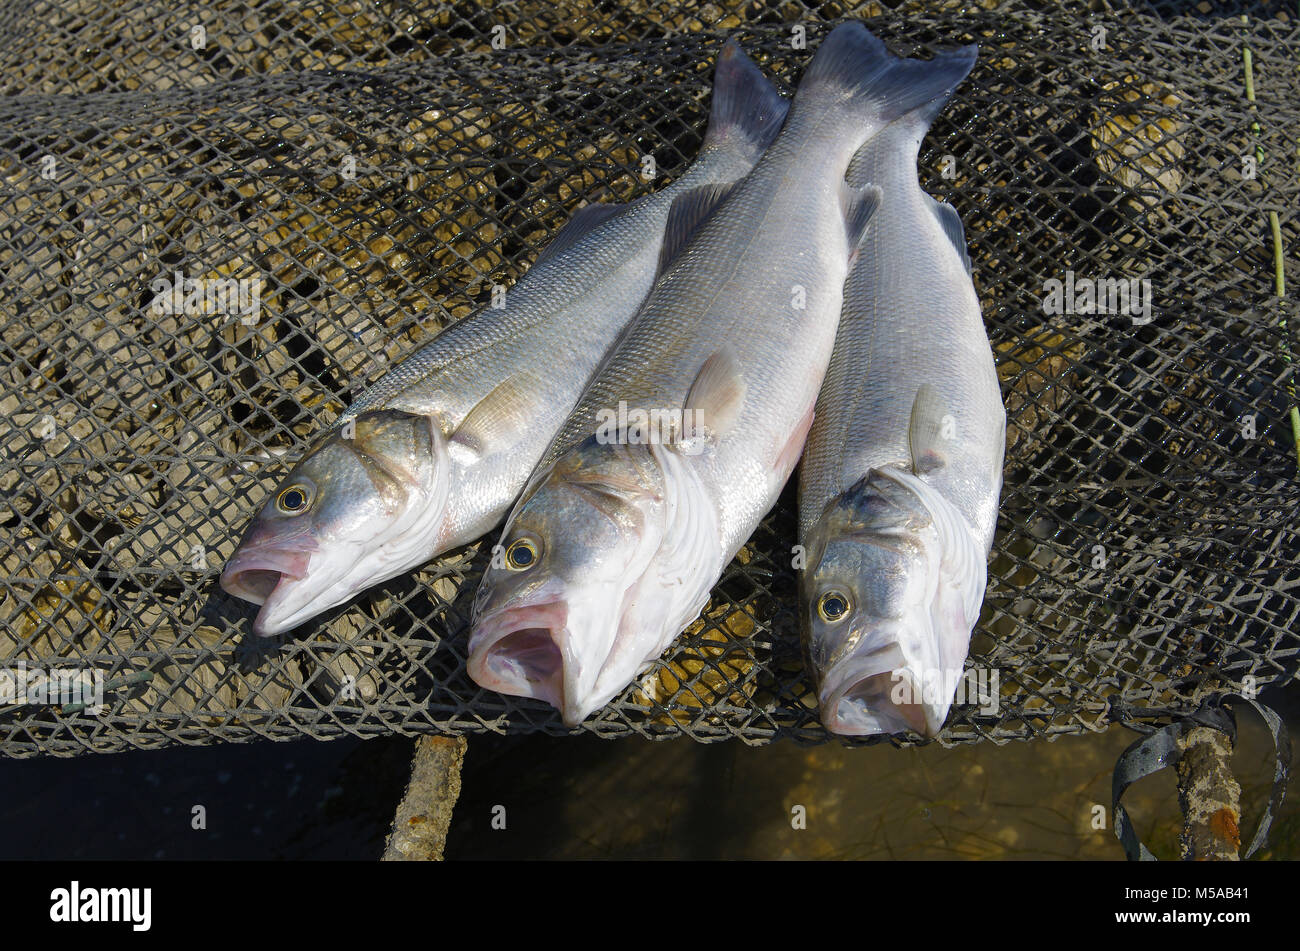 sea bass caught by angler Stock Photo